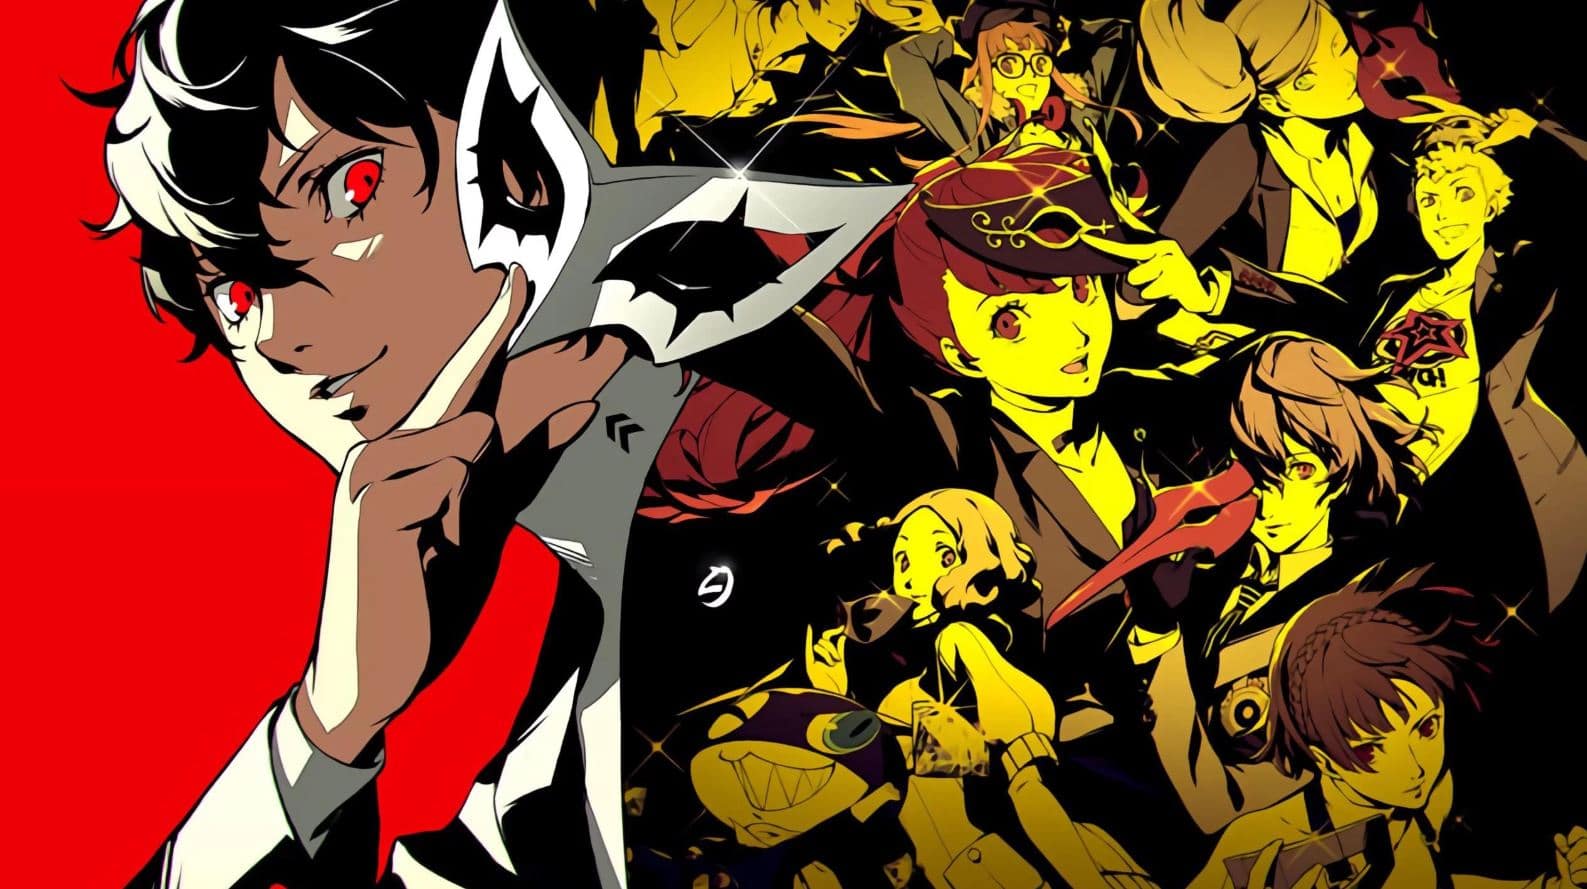 Round Up: Persona 5 Royal Reviews - Currently One of the Highest